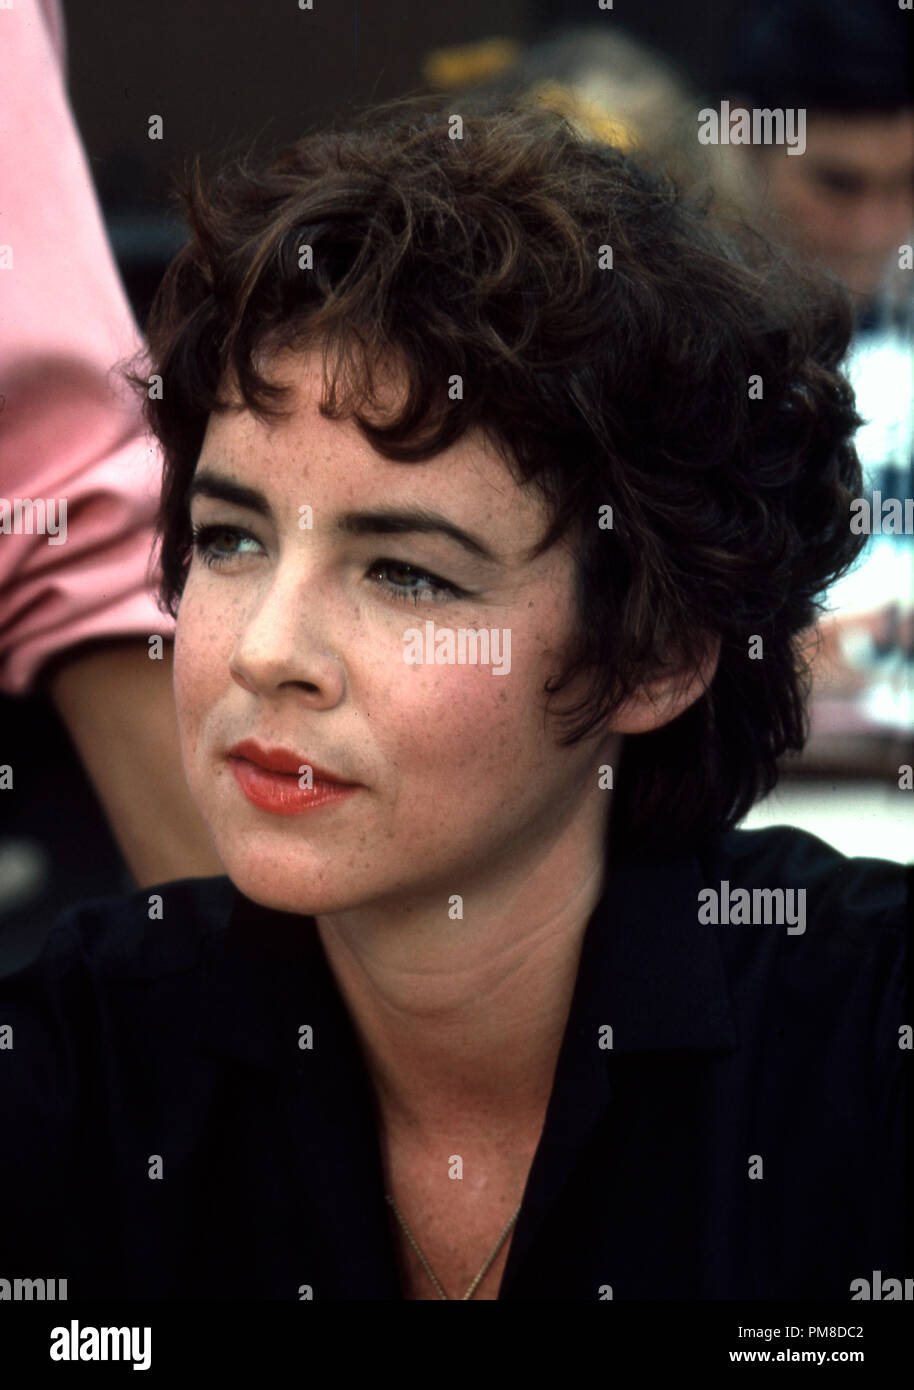 Studio released publicity film still from 'Grease' Stockard Channing 1978 Paramount Pictures    File Reference # 31955 464THA Stock Photo